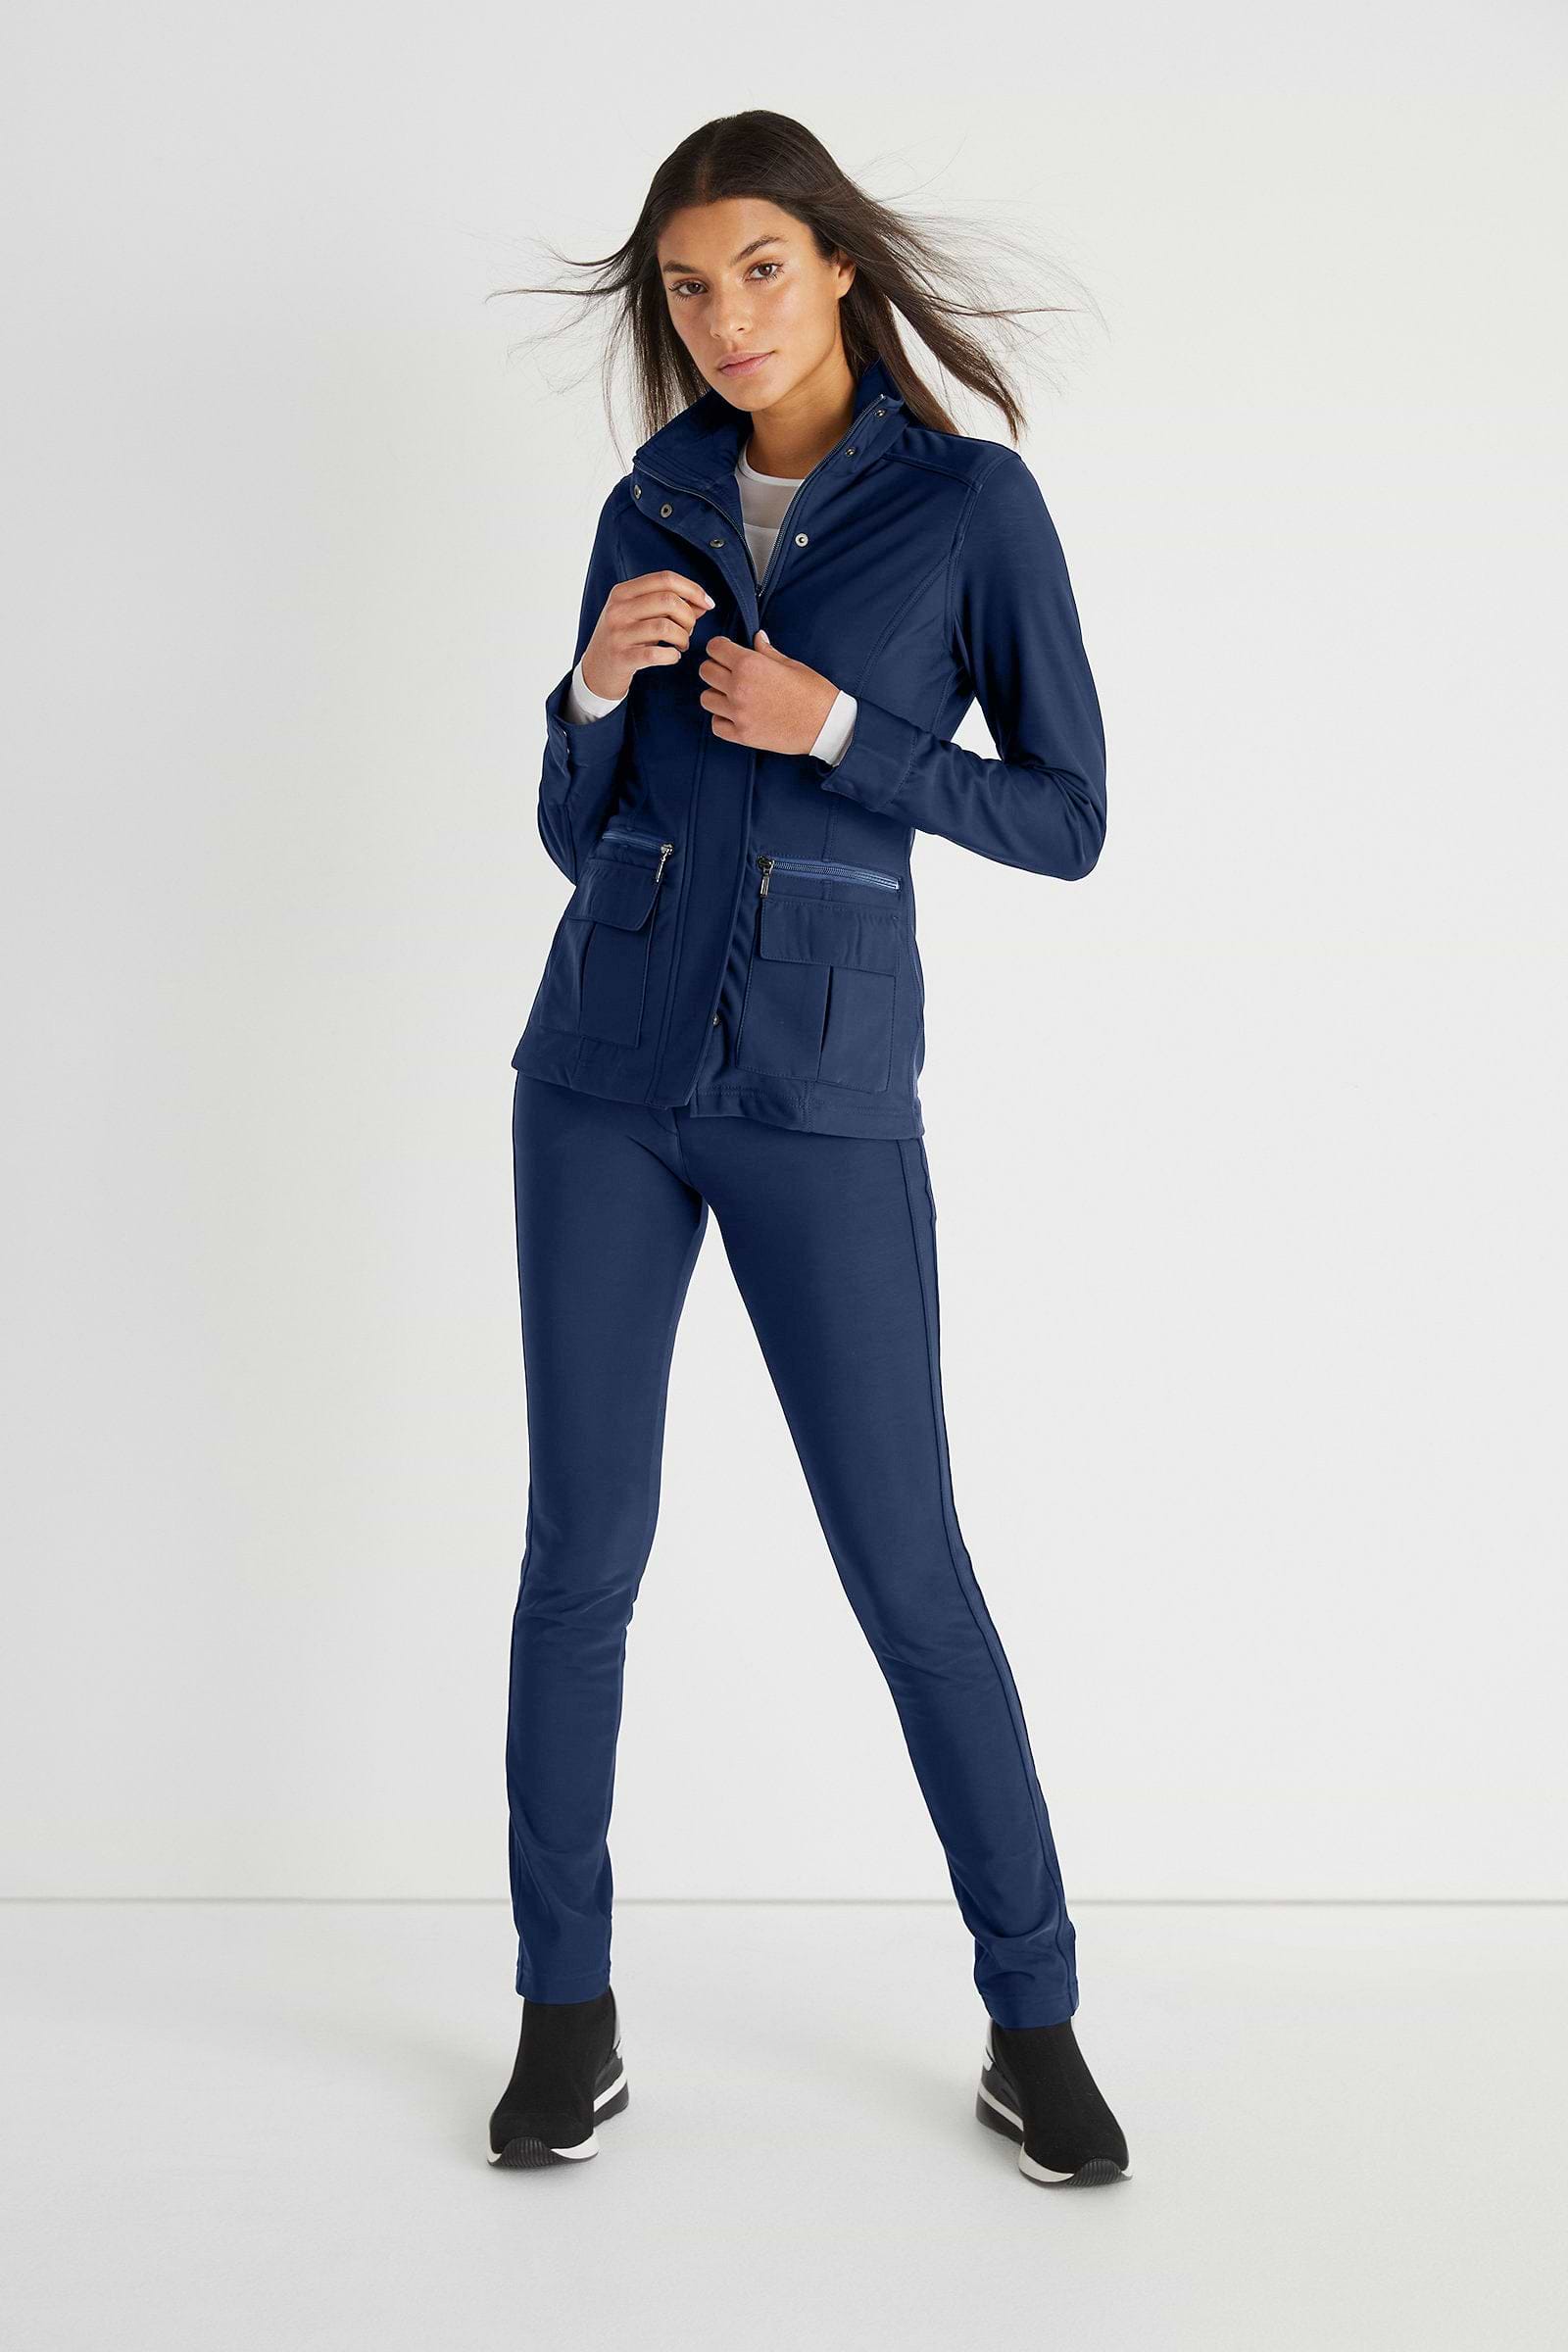 The Best Travel Pants. Front Profile of the Skyler Cozy Fleece-Lined Travel Pant in Navy